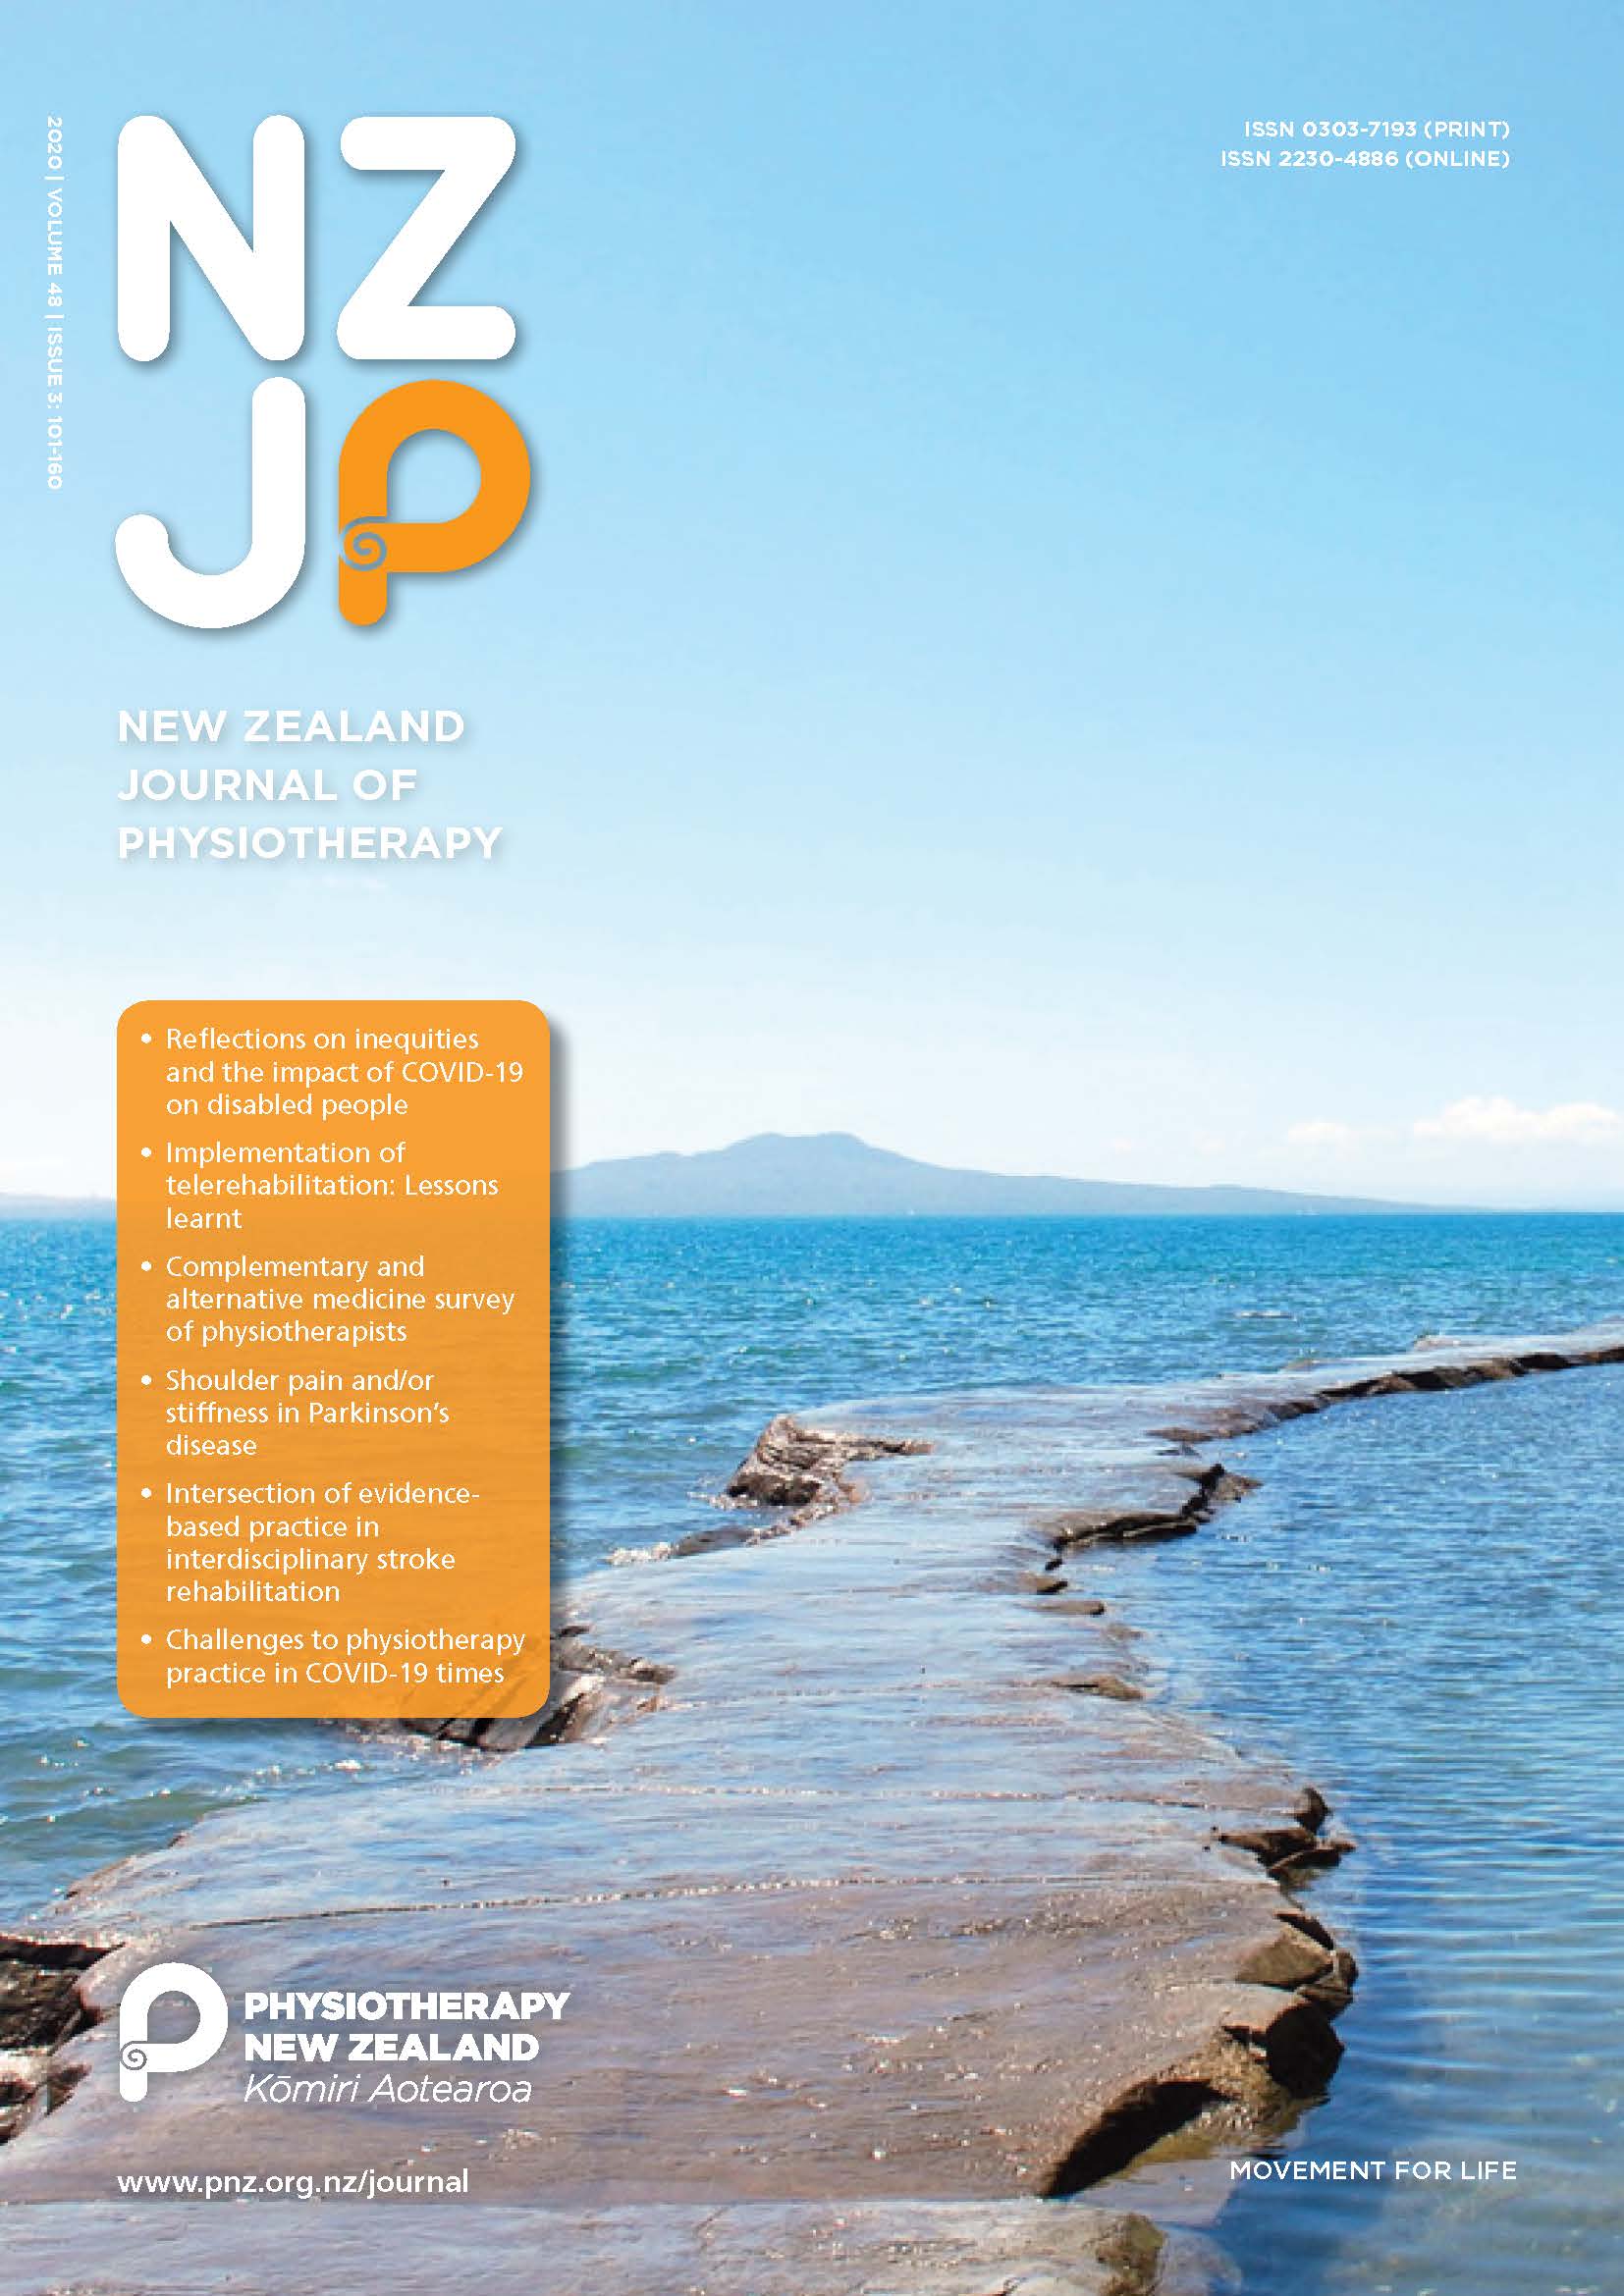 					View Vol. 48 No. 3 (2020): New Zealand Journal of Physiotherapy
				